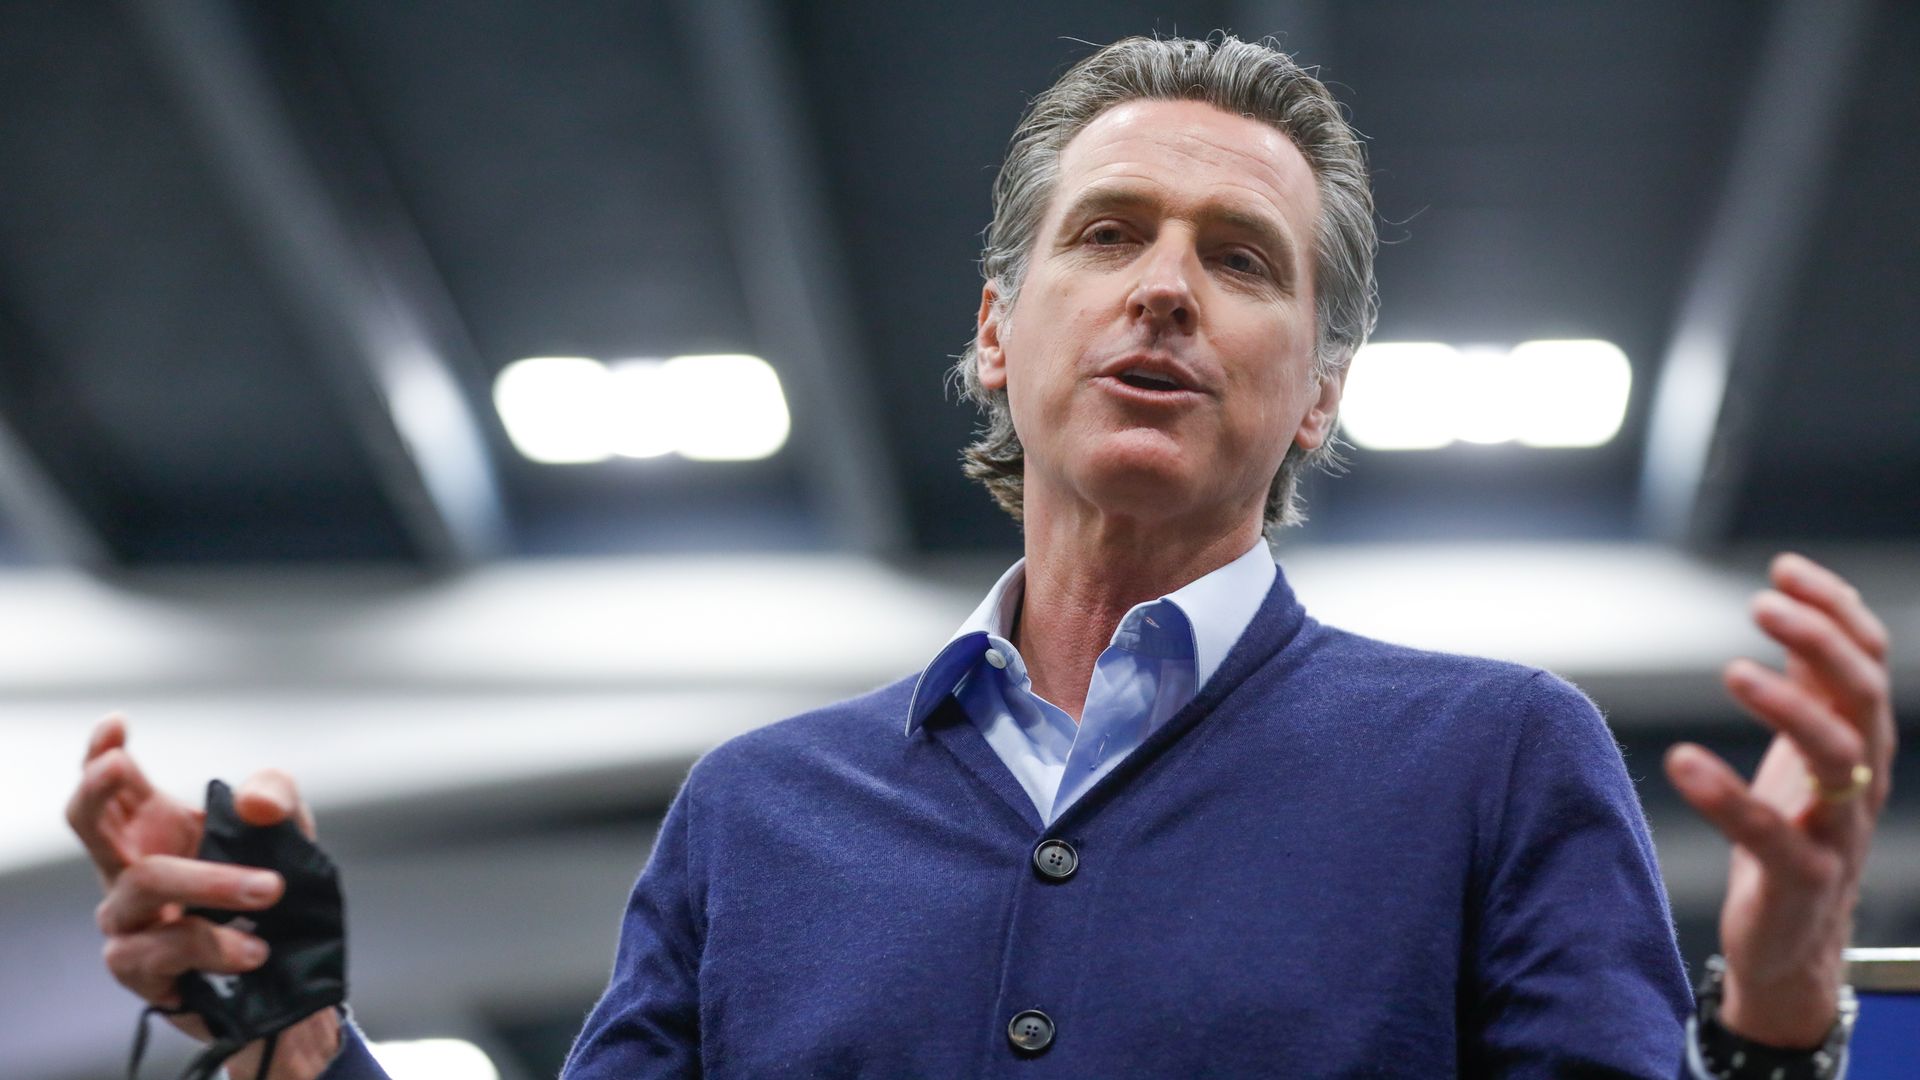 Governor Gavin Newsom speaks to the press at the Moscone Center vaccination site on Friday, Feb. 12, 2021 in San Francisco, California.